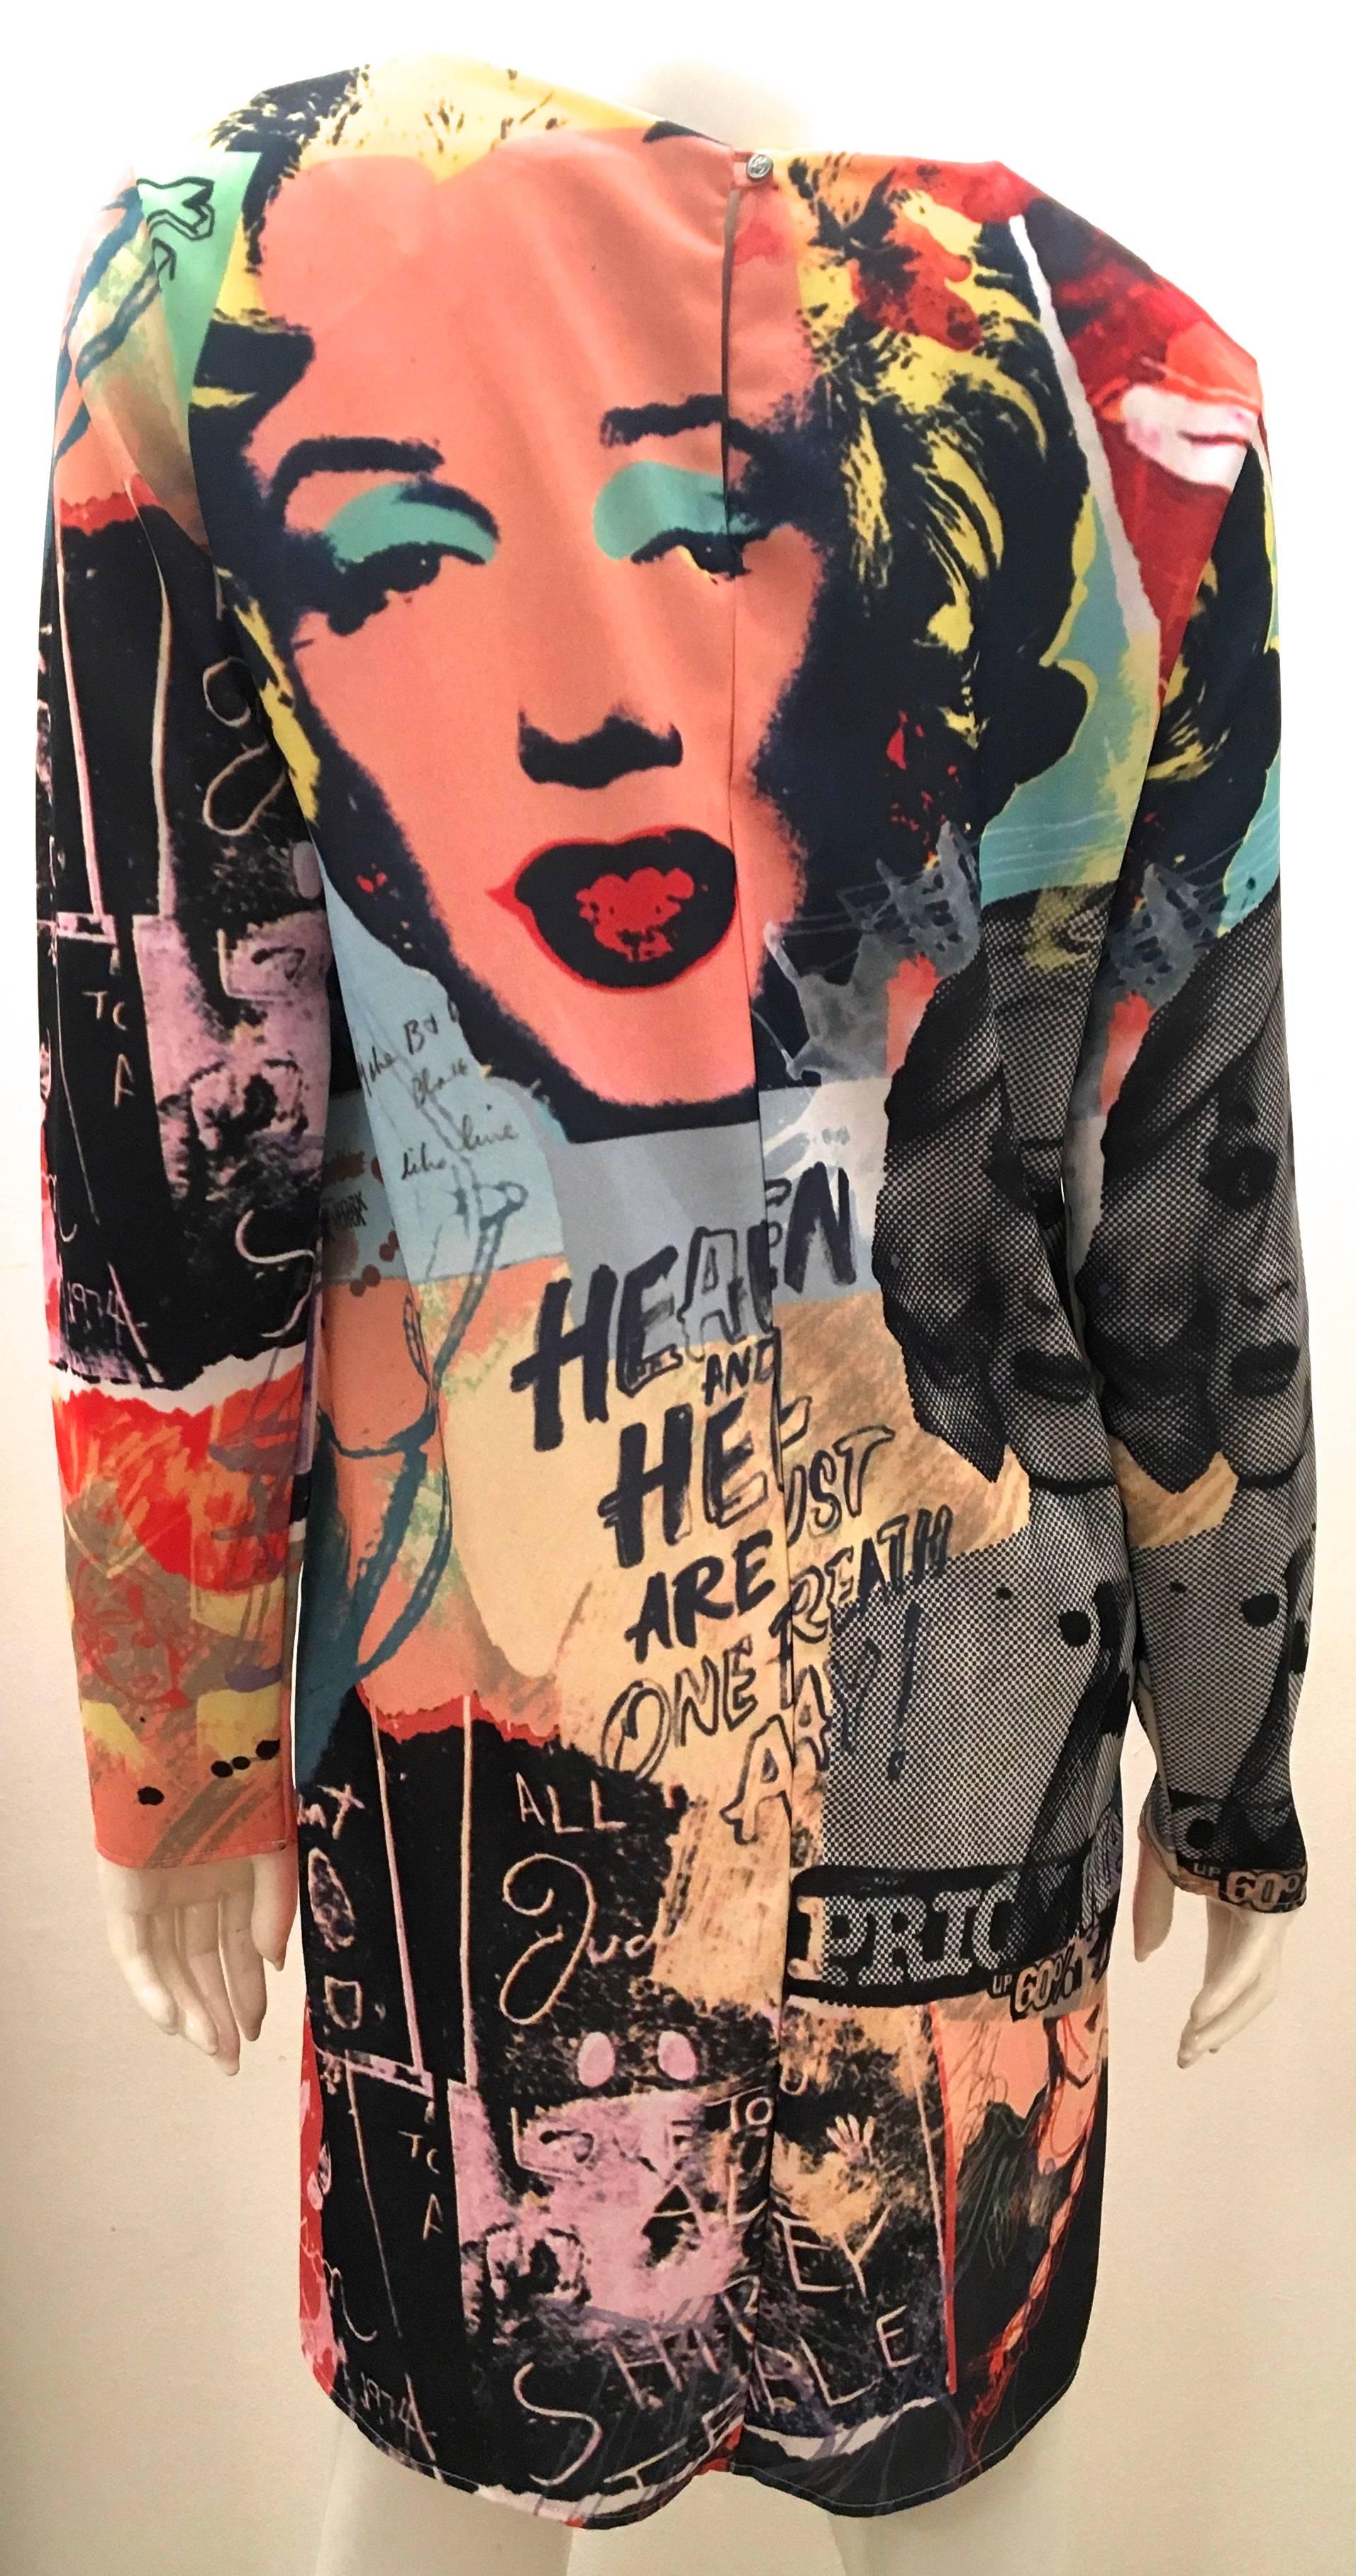 Presented here is a beautiful dress featuring the design work from one of history's most notorious artists, Andy Warhol. The dress specifically features Andy's artwork one of his subjects for which he was well known for, Marilyn Monroe. The dress is